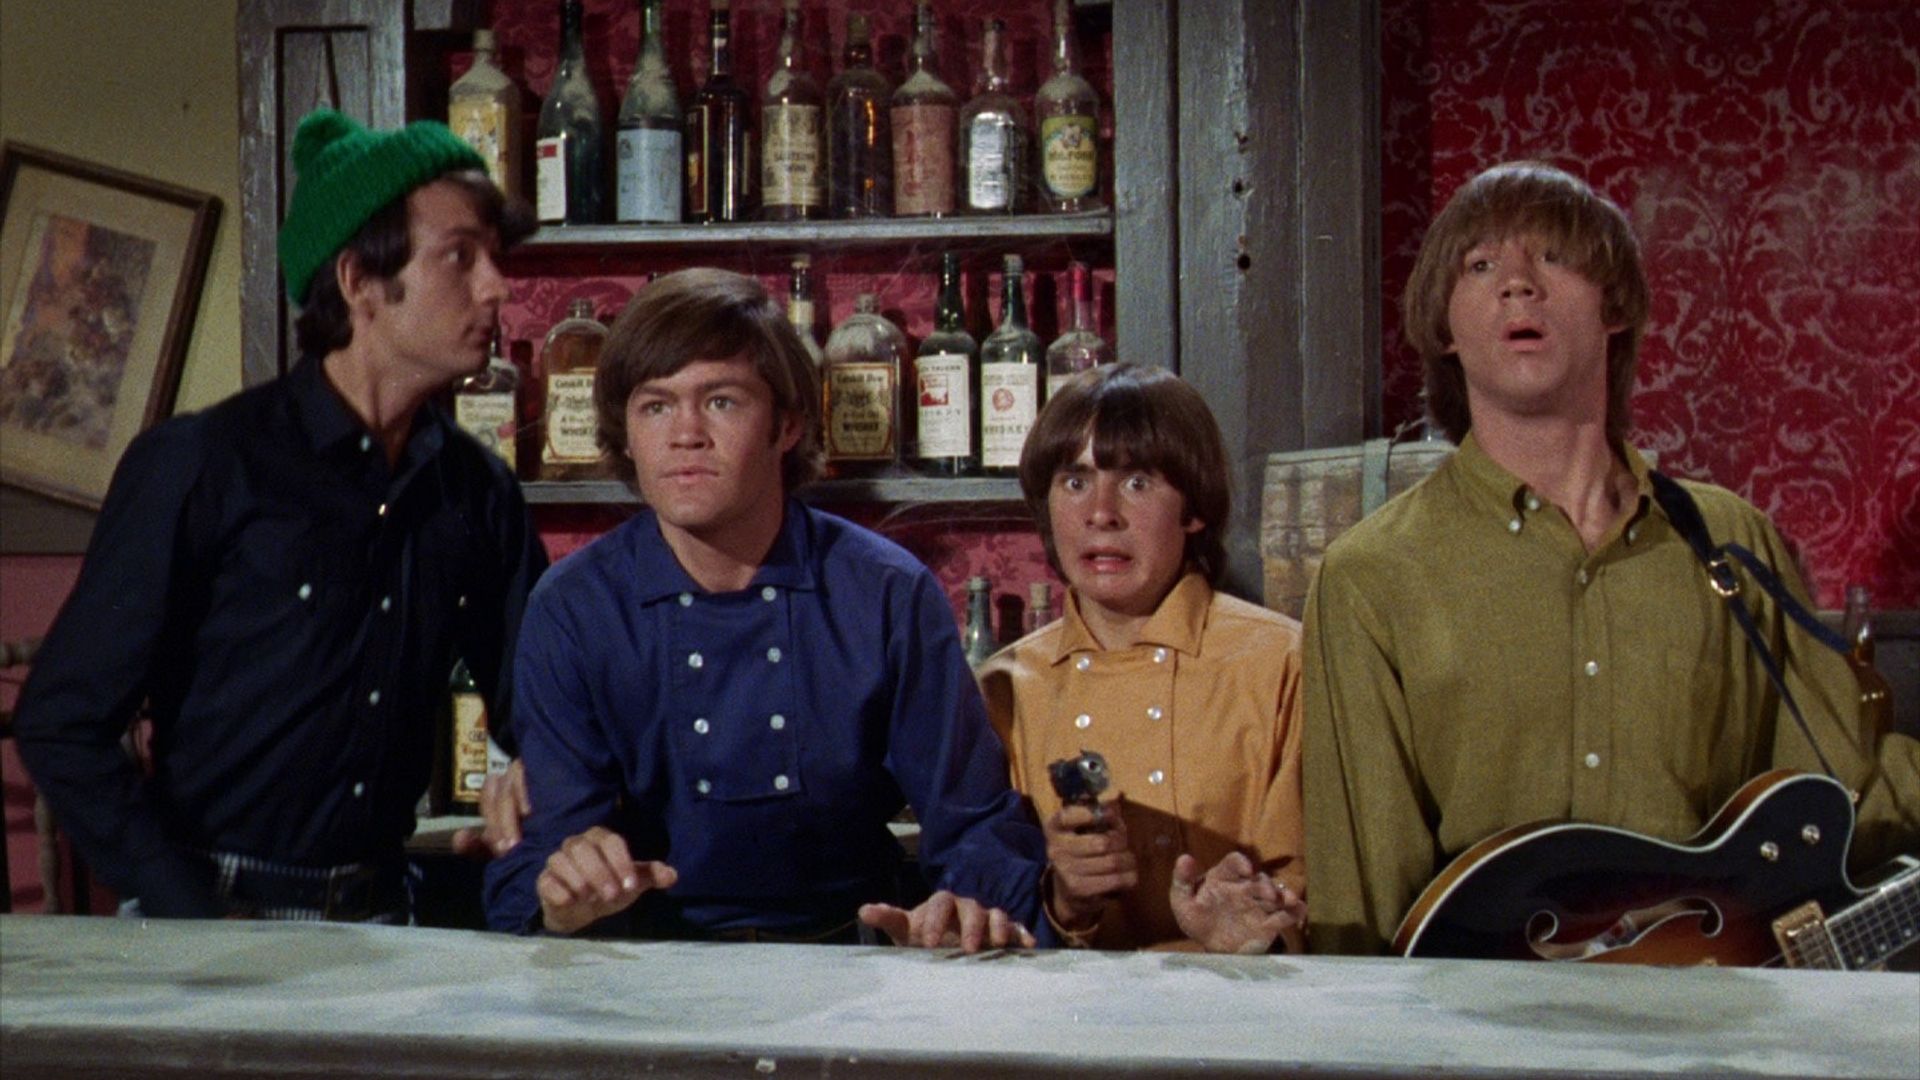 The Monkees background